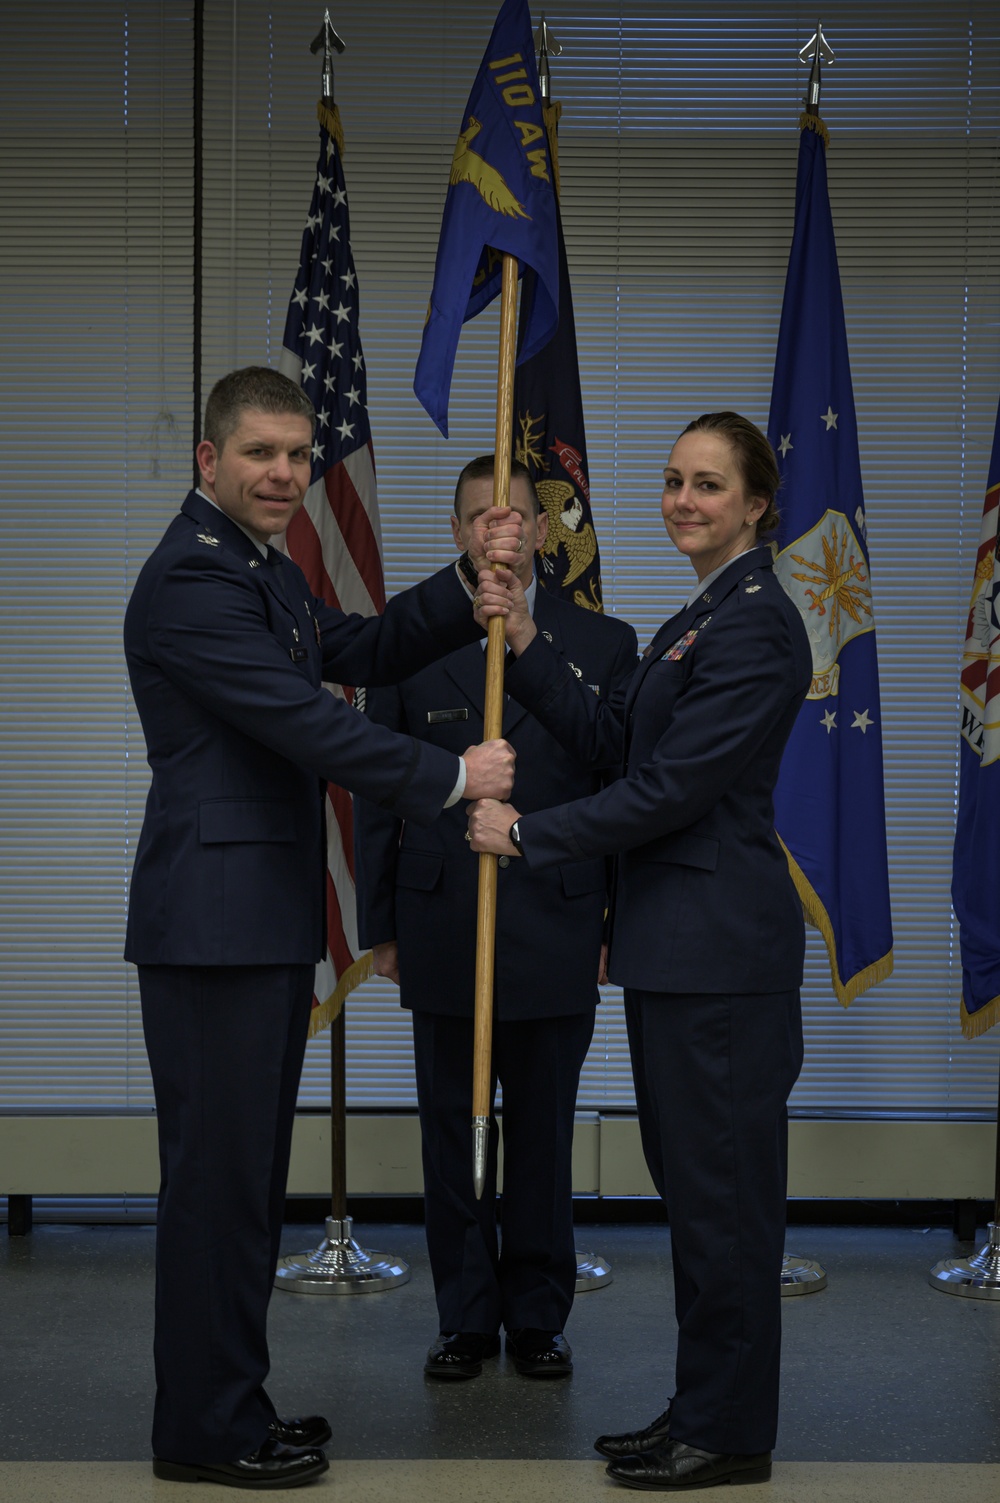 Lt. Col. Davis Assumes Command of the 110th Medical Group